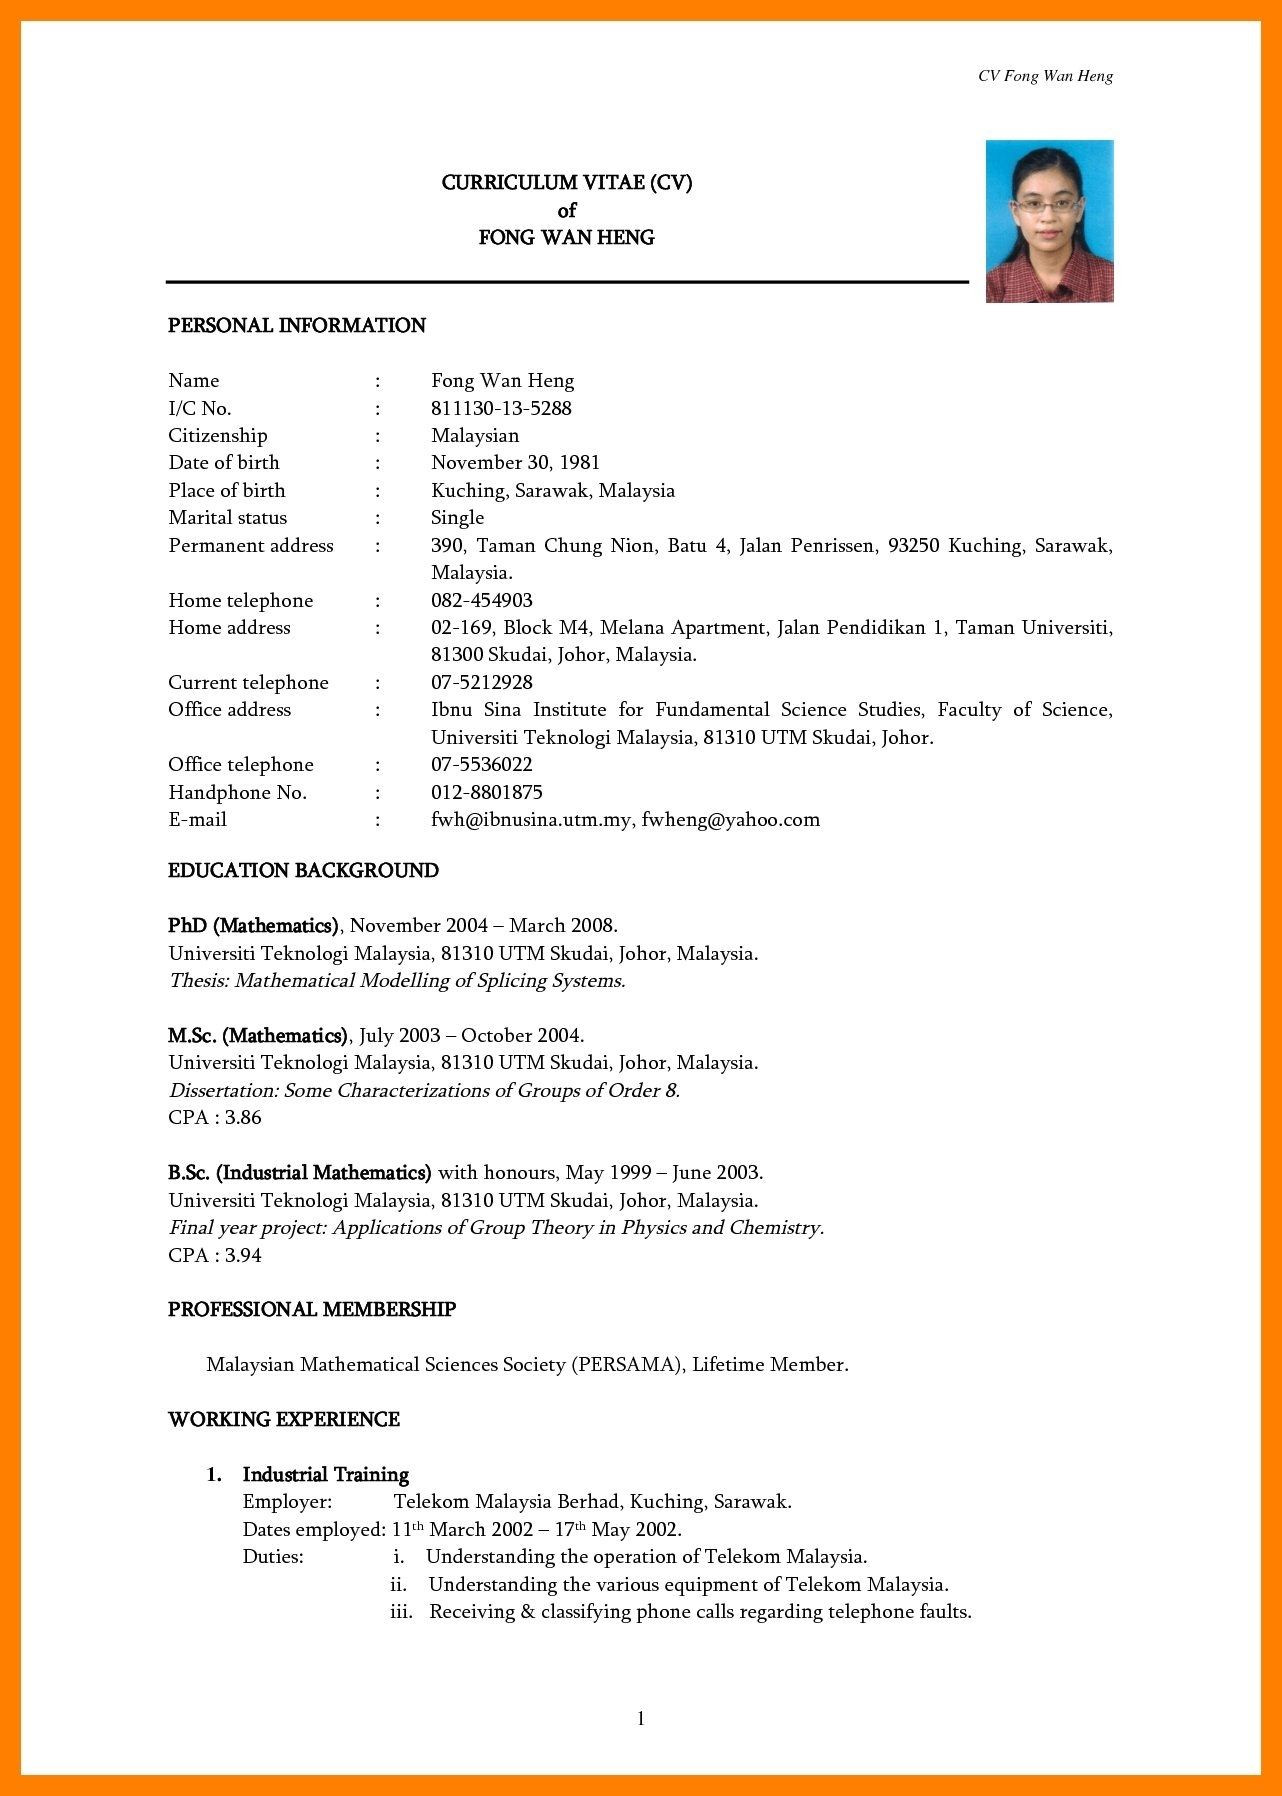 Simple Resume Template for Students Free Download Simple Resume Template Malaysia Free Download with Simple Resume …